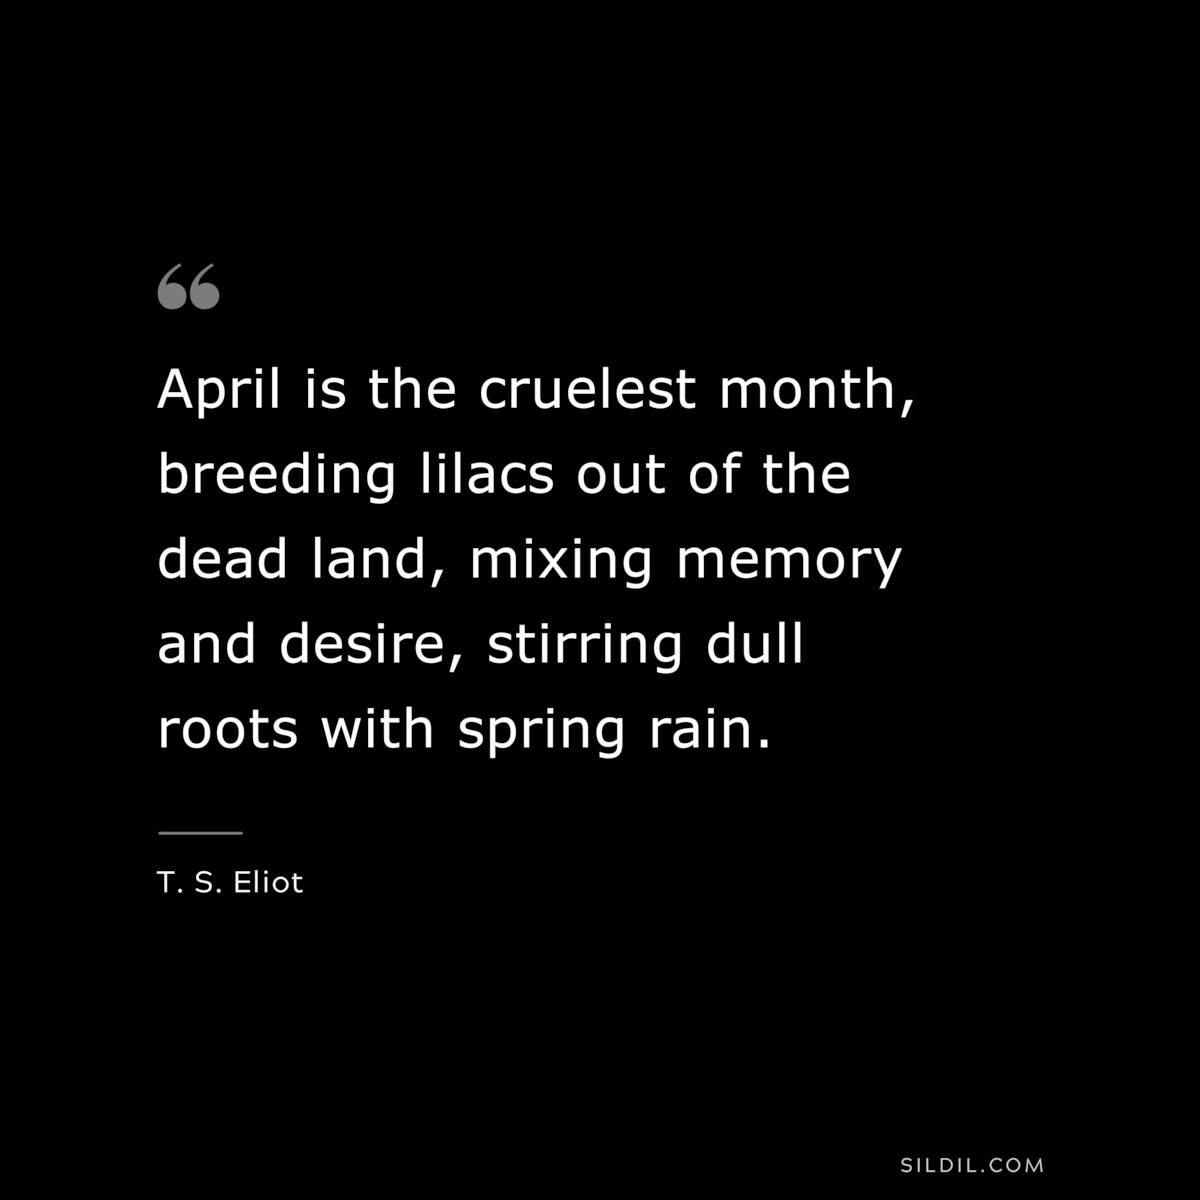 April is the cruelest month, breeding lilacs out of the dead land, mixing memory and desire, stirring dull roots with spring rain. ― T. S. Eliot